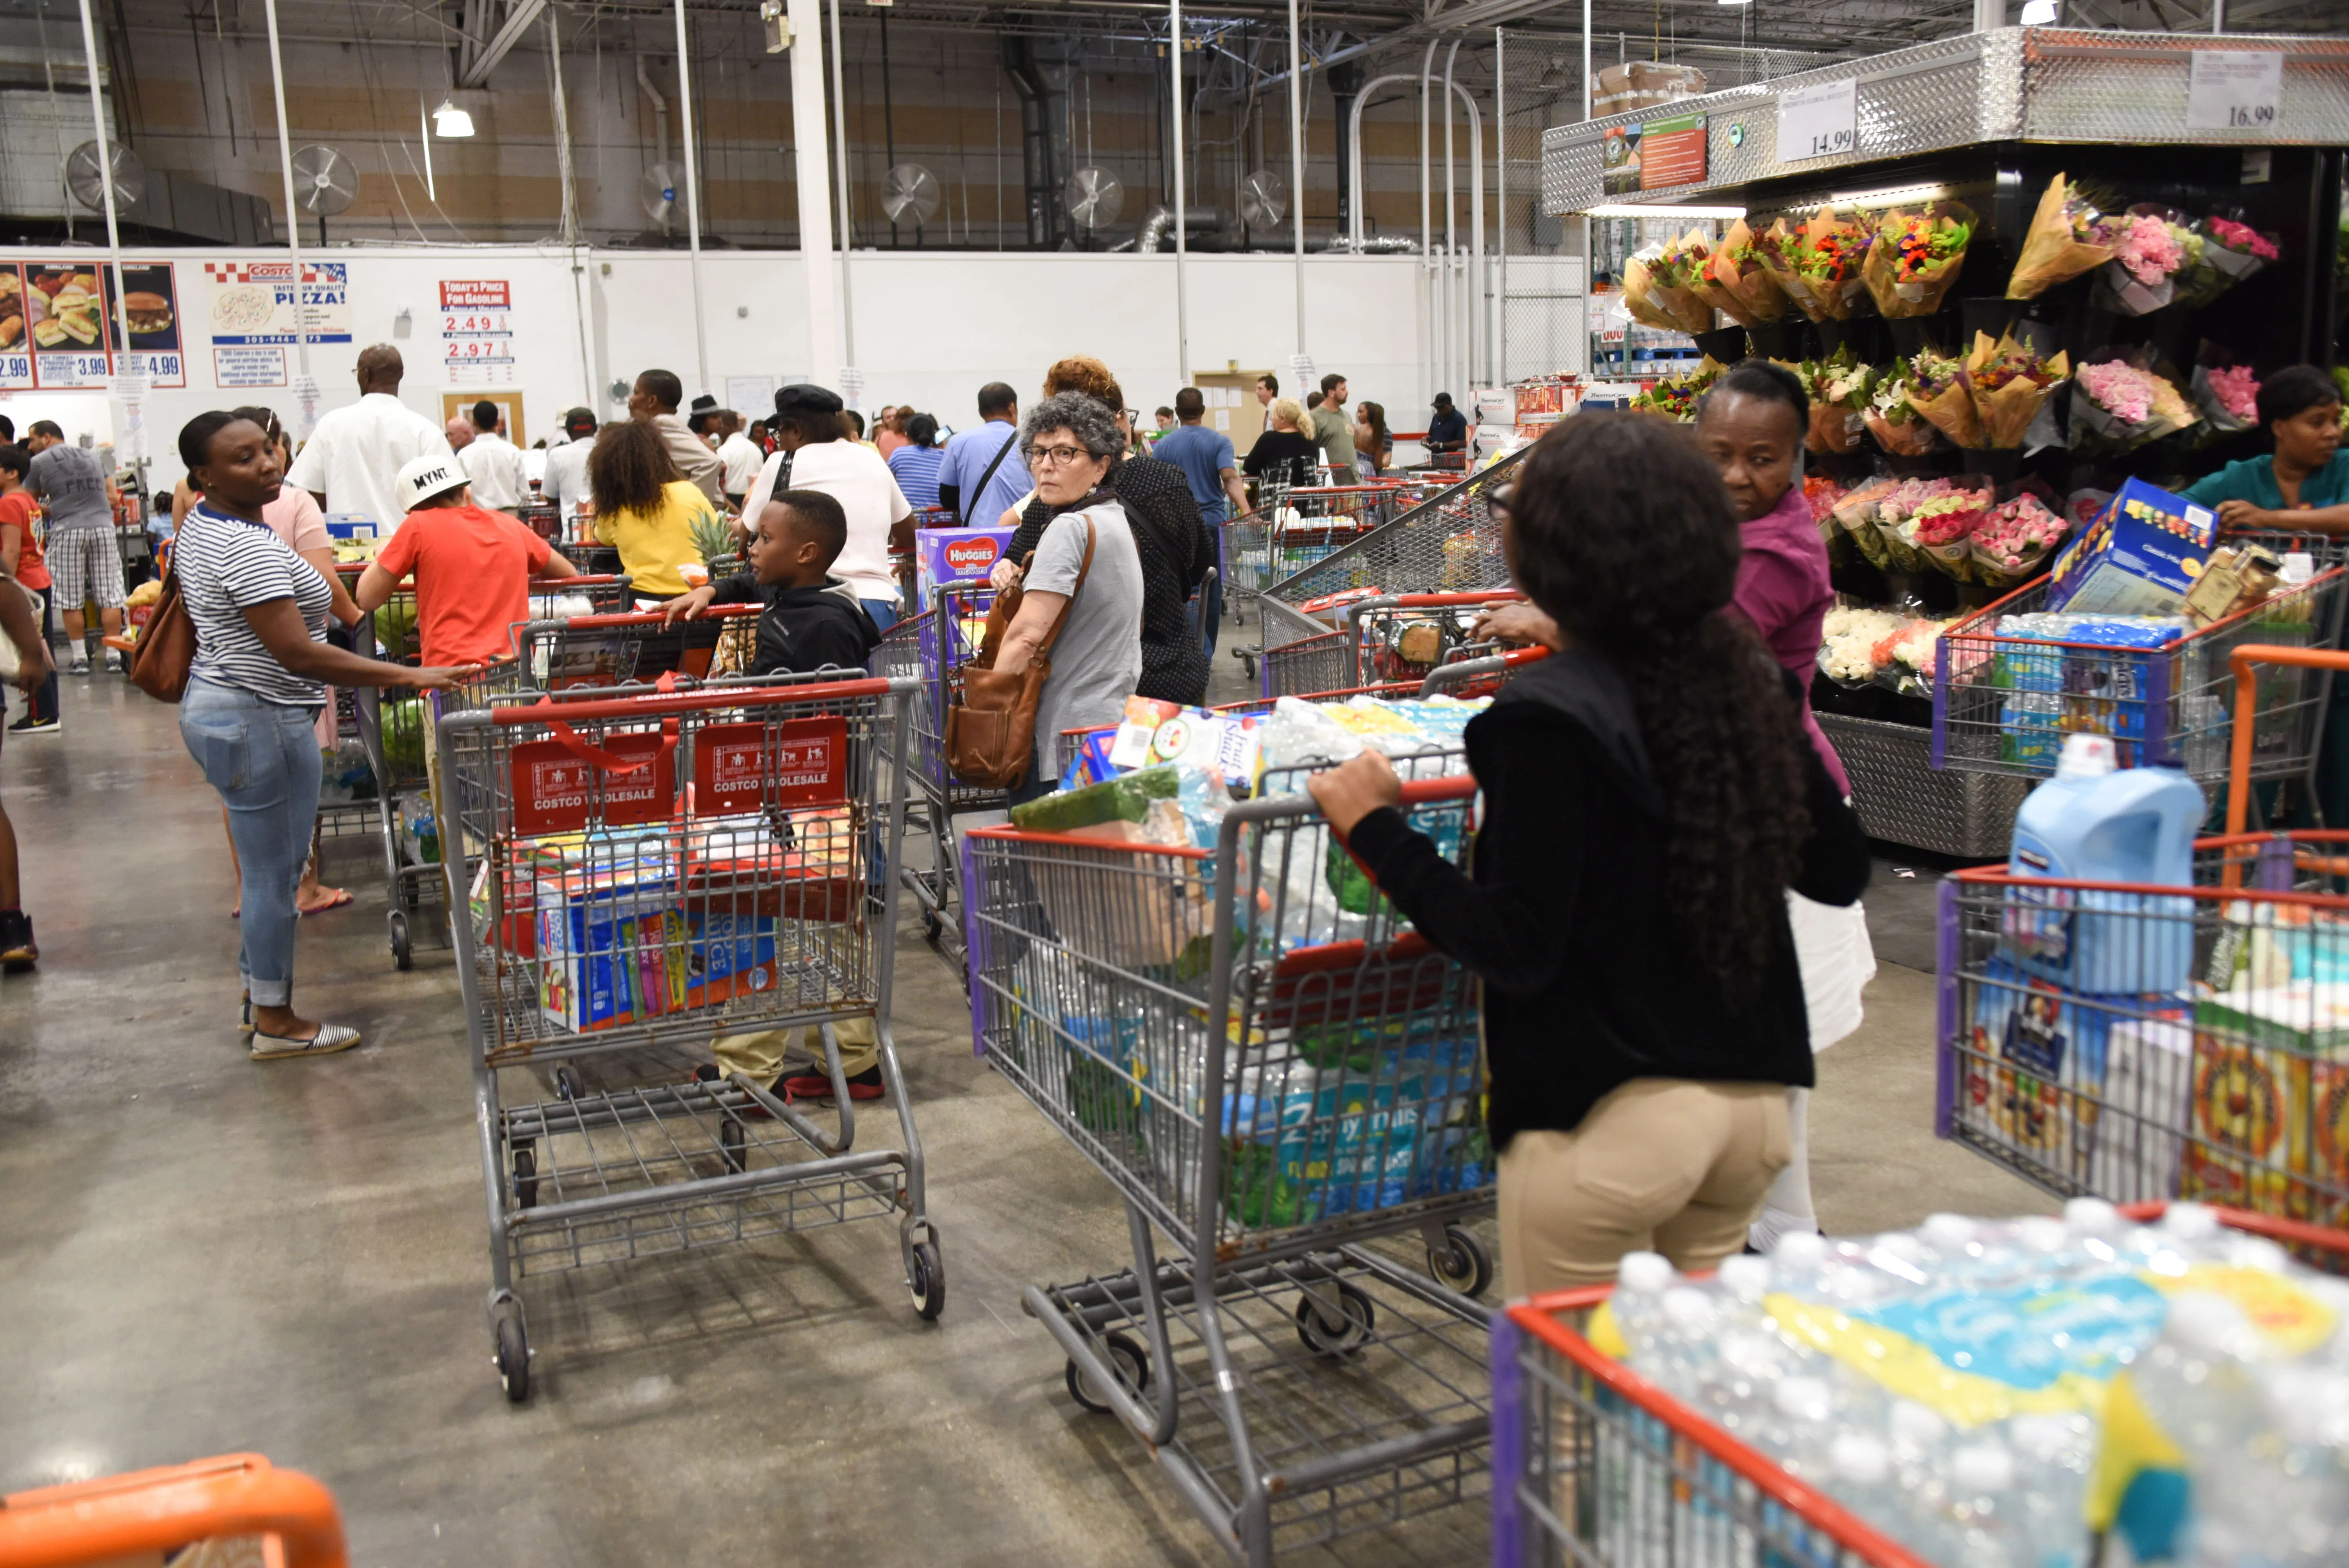 Costco Is Selling a $6,000 Doomsday Preparation Kit That Can Feed a Family of 4 for a Year